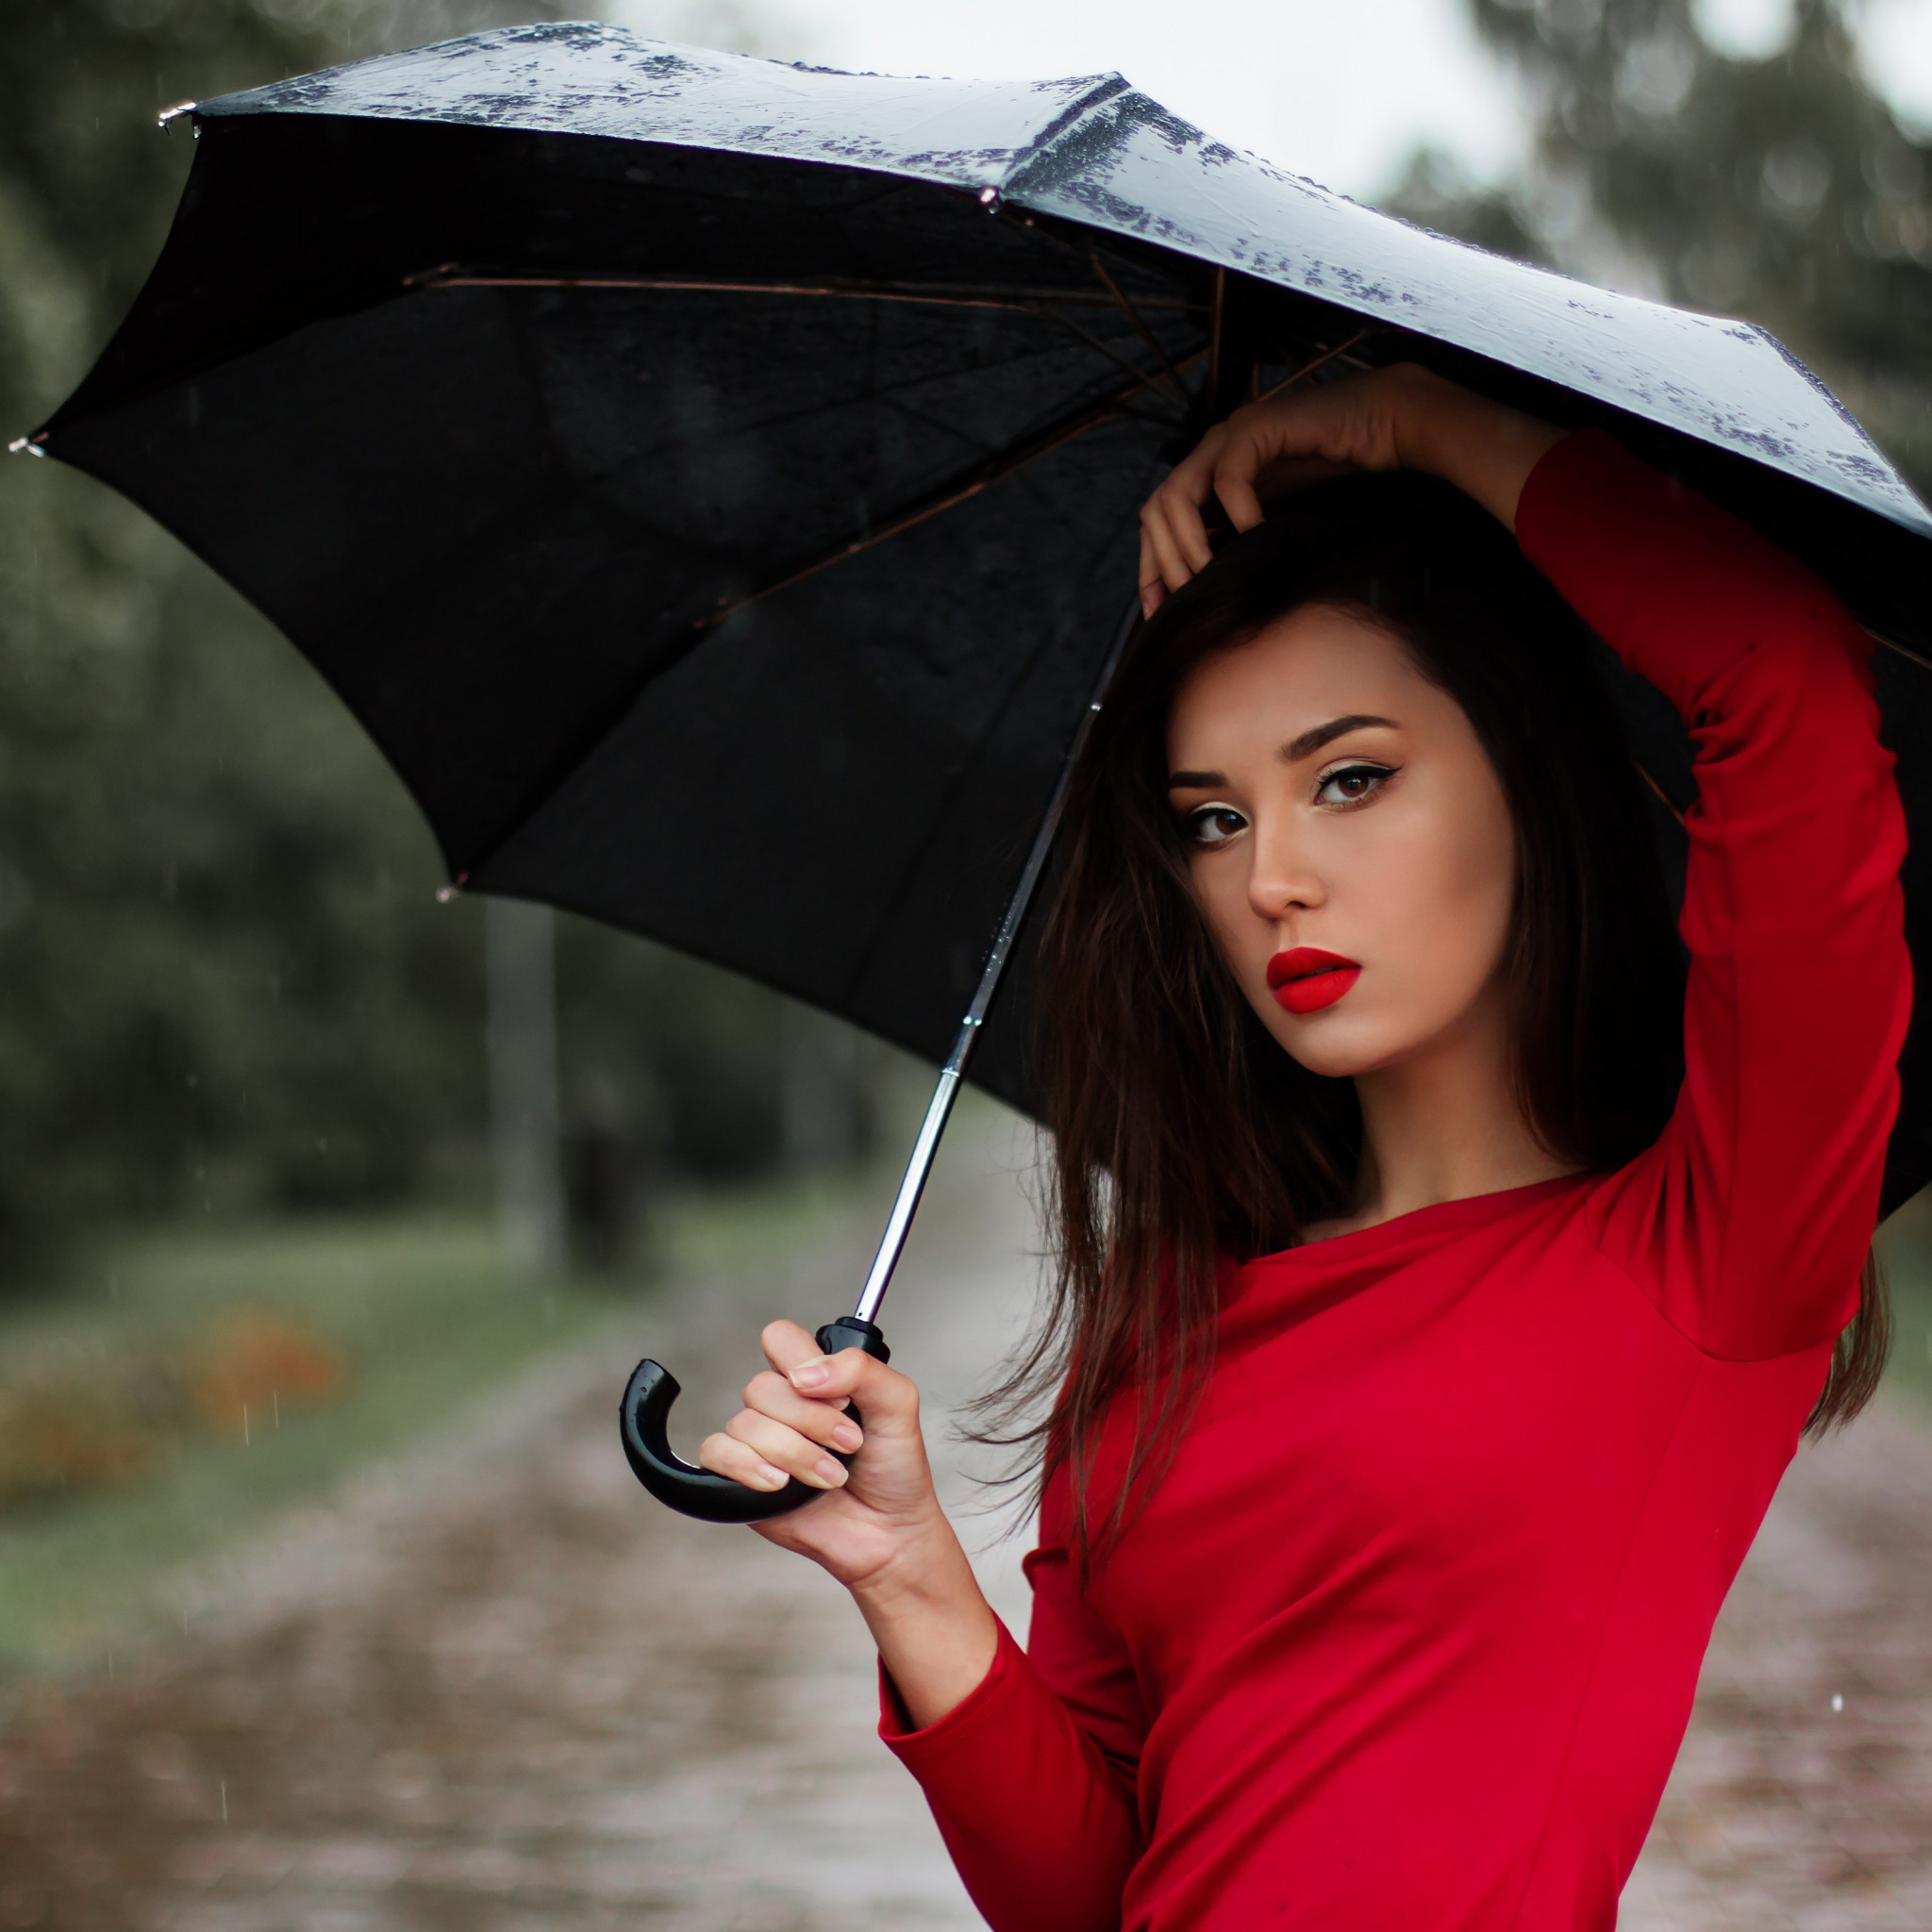 Beauitful girl in a rainy day wallpaper 2048x2048